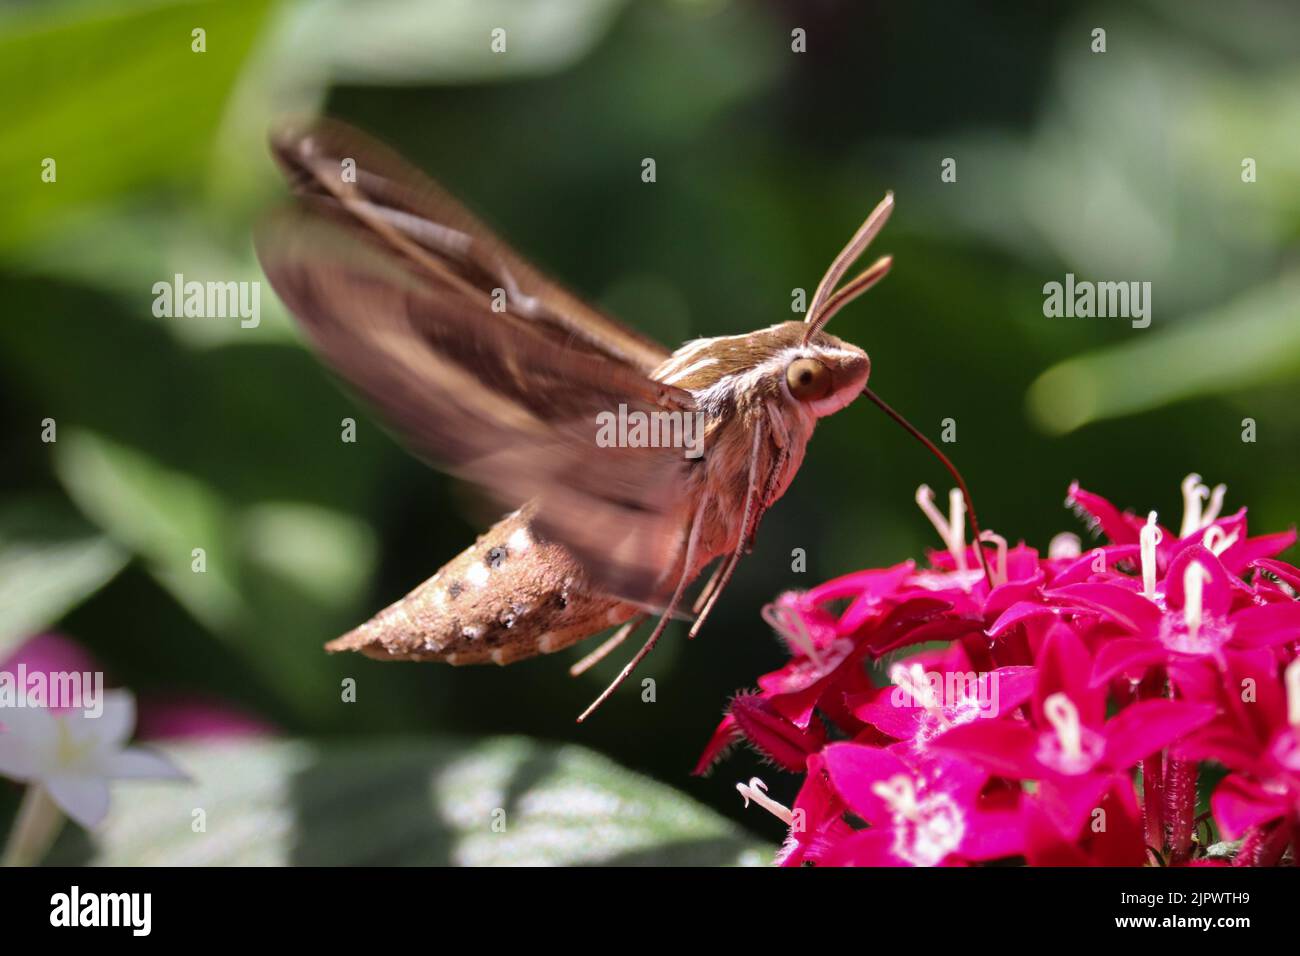 White-lined sphinx moth or Hyles lineata feeding on pink pentas flowers at the Home Depot in Payson, Arizona. Stock Photo